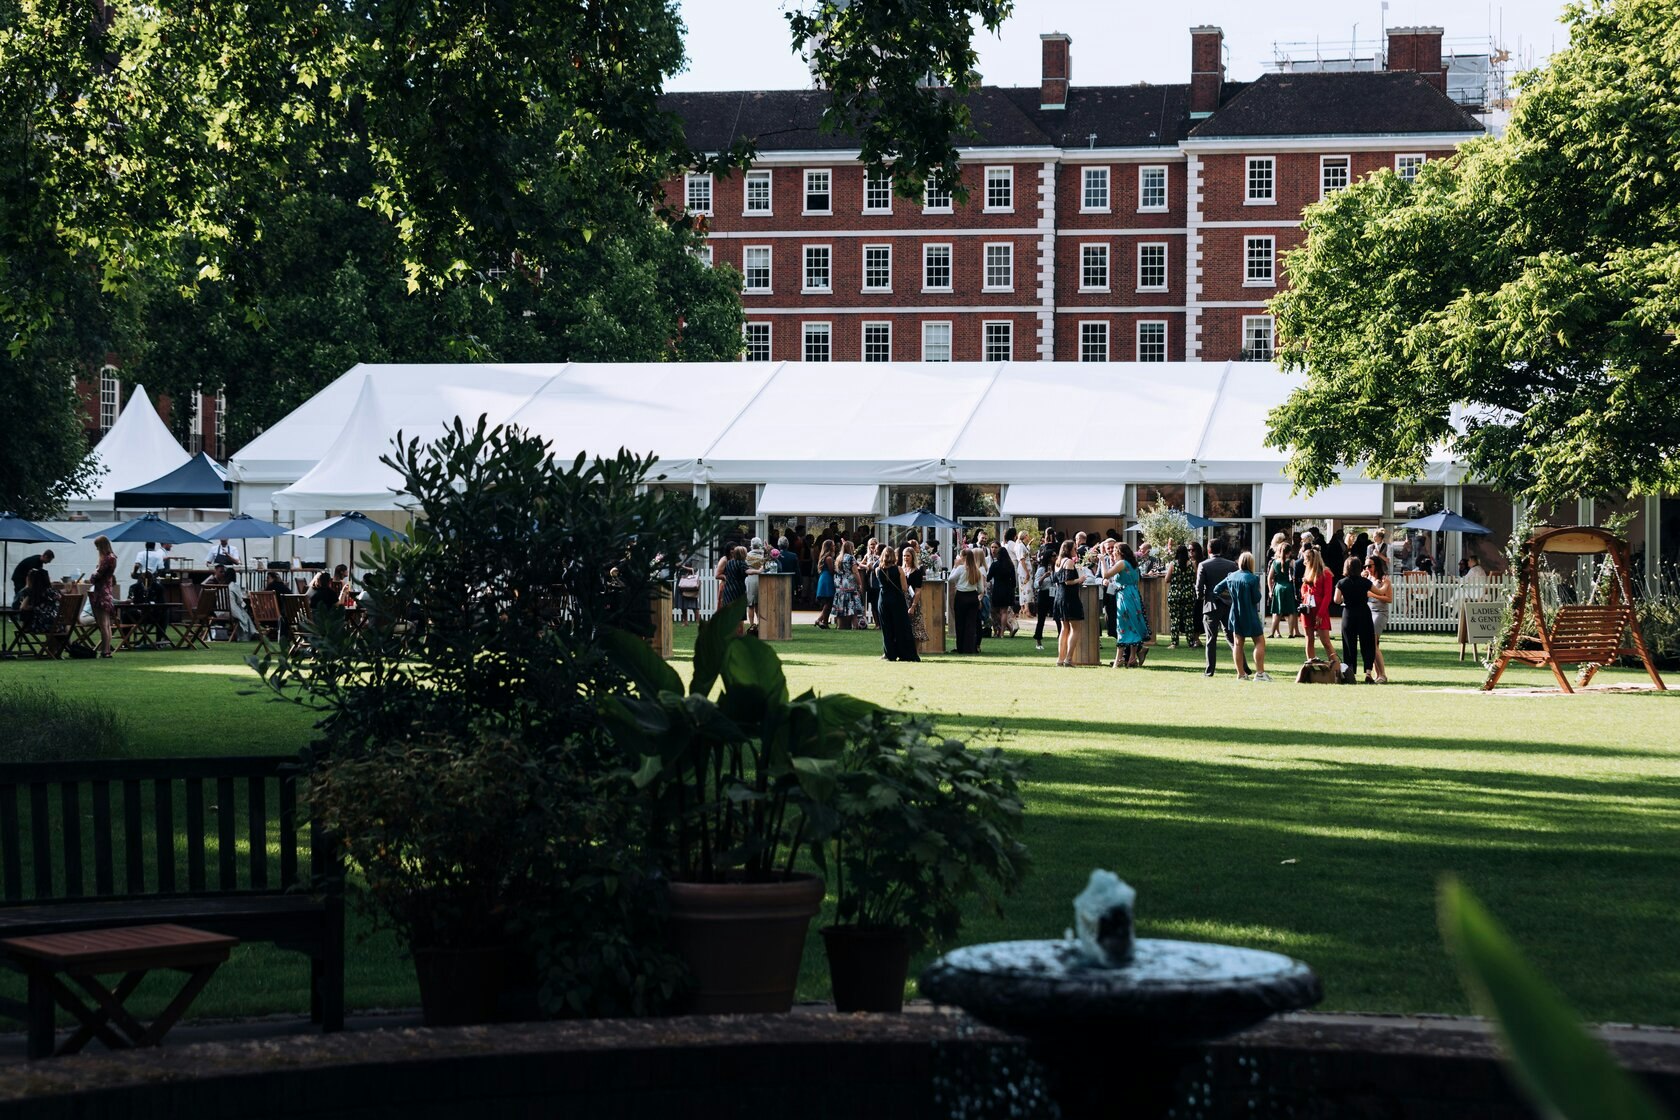 Venues on the Thames in London - The Inner Temple